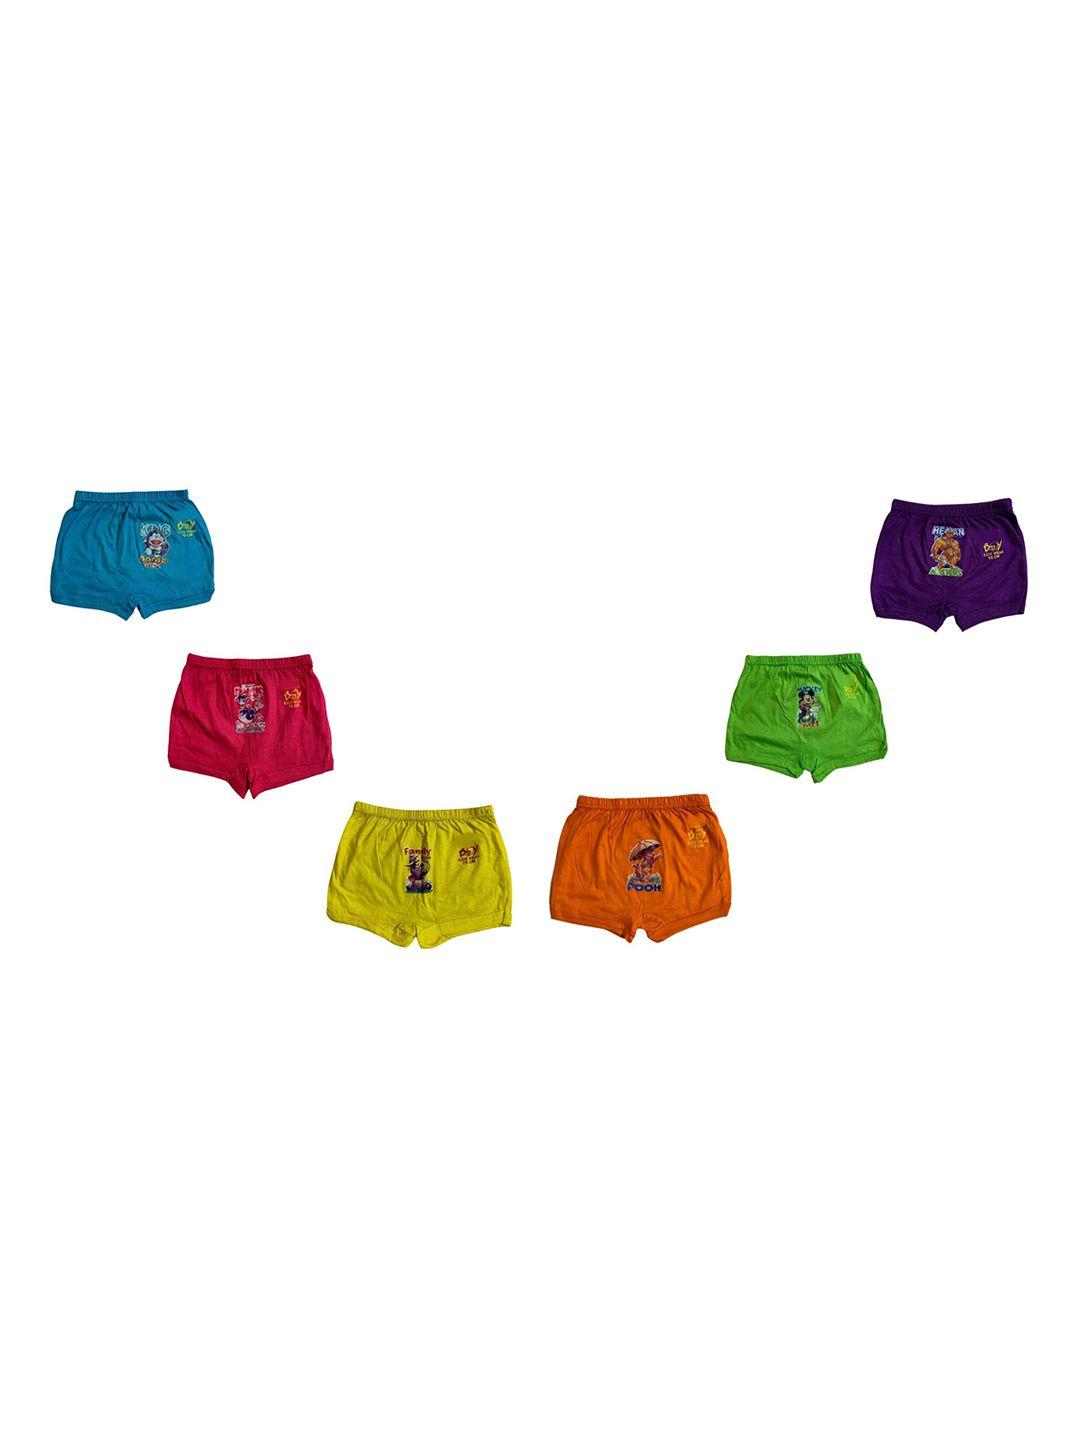 cooltees4u-kids-pack-of-6-printed-cotton-boyshorts-briefs